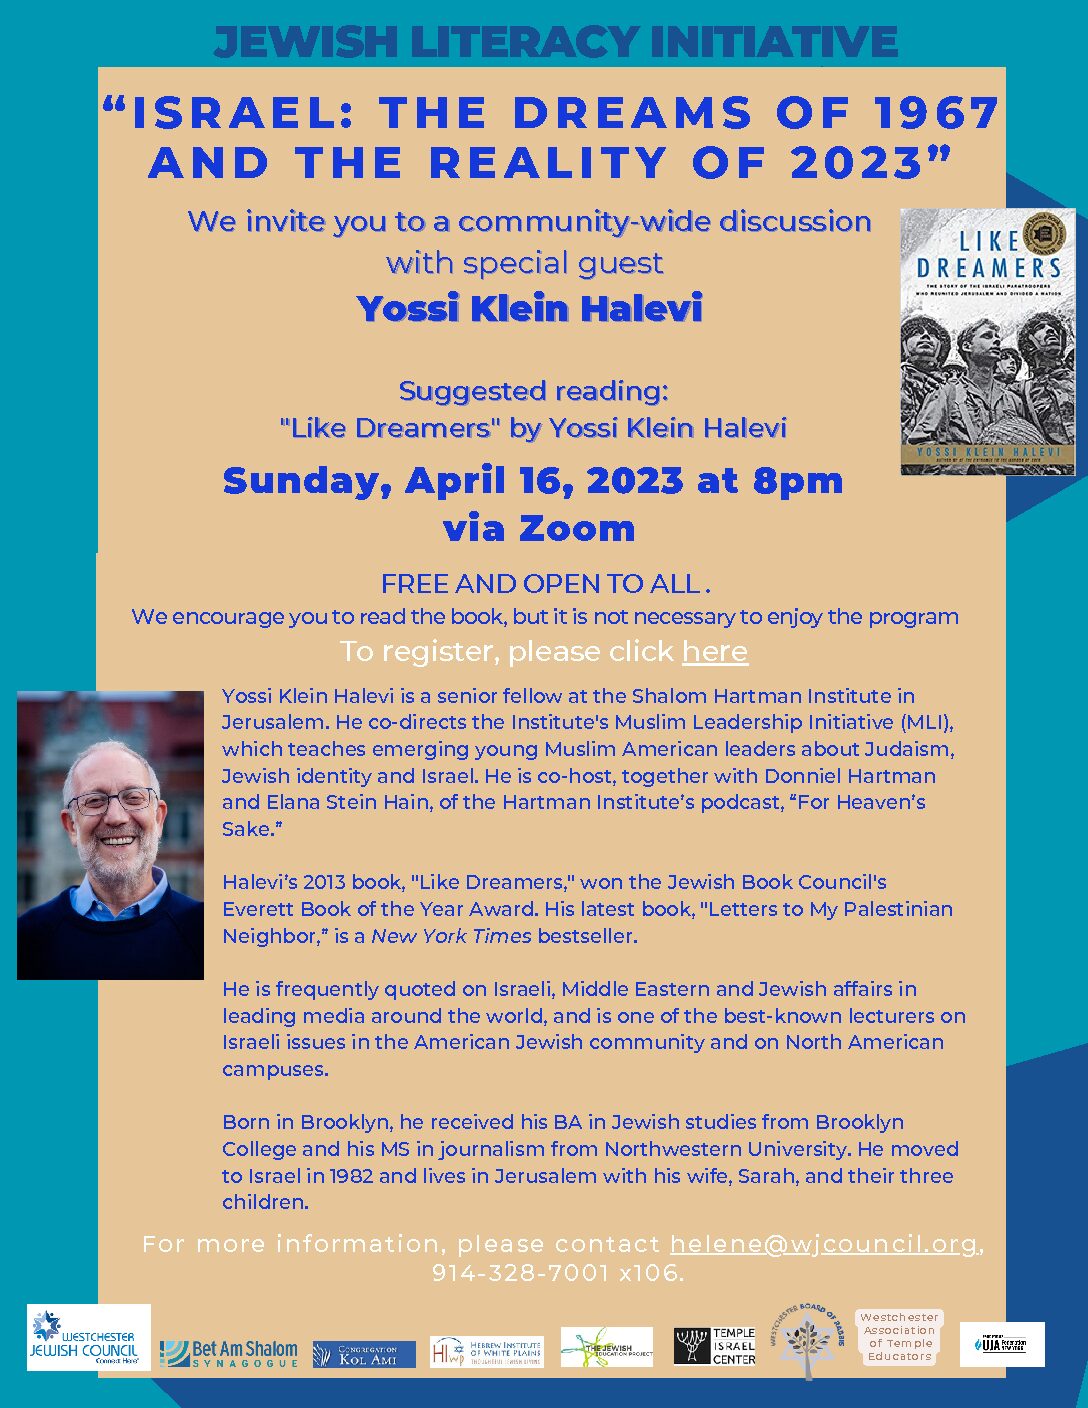 Westchester Jewish Council Jewish Literacy - Israel: The Dreams of 1967 and the Reality of 2023 with Yossi Klein Halevi